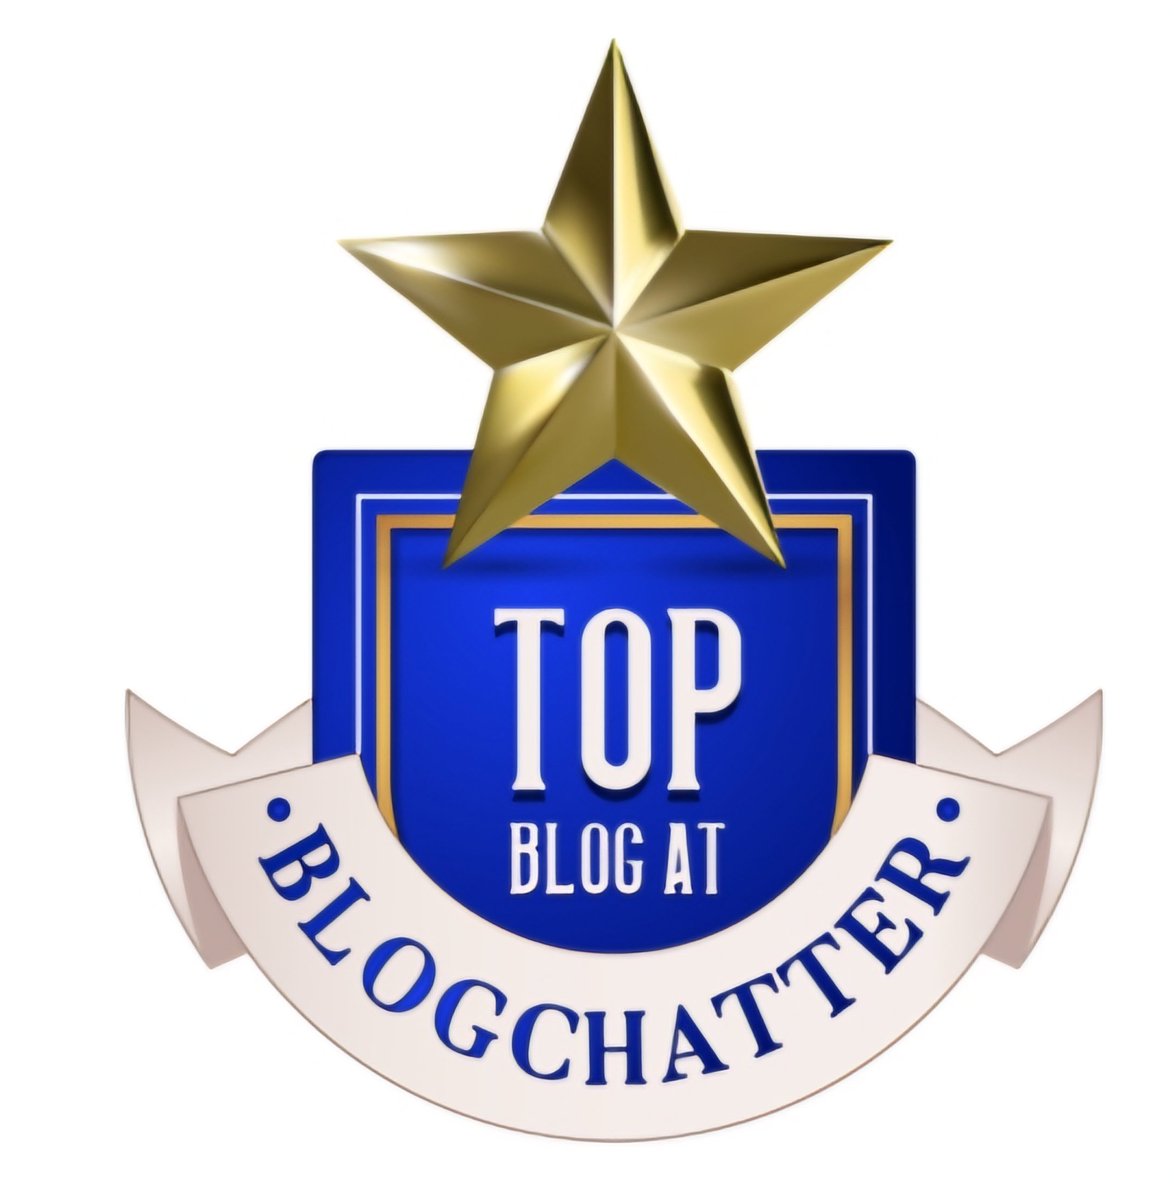 So while I sighing with relief yesterday on the successful completion of #BlogchatterA2Z a mail slipped past. It was from Blogchatter  telling that my blogpost for alphabet 'Z' was the top blog 
Shukriya @blogchatter

undecidedindubai.wordpress.com/2024/04/30/blo…